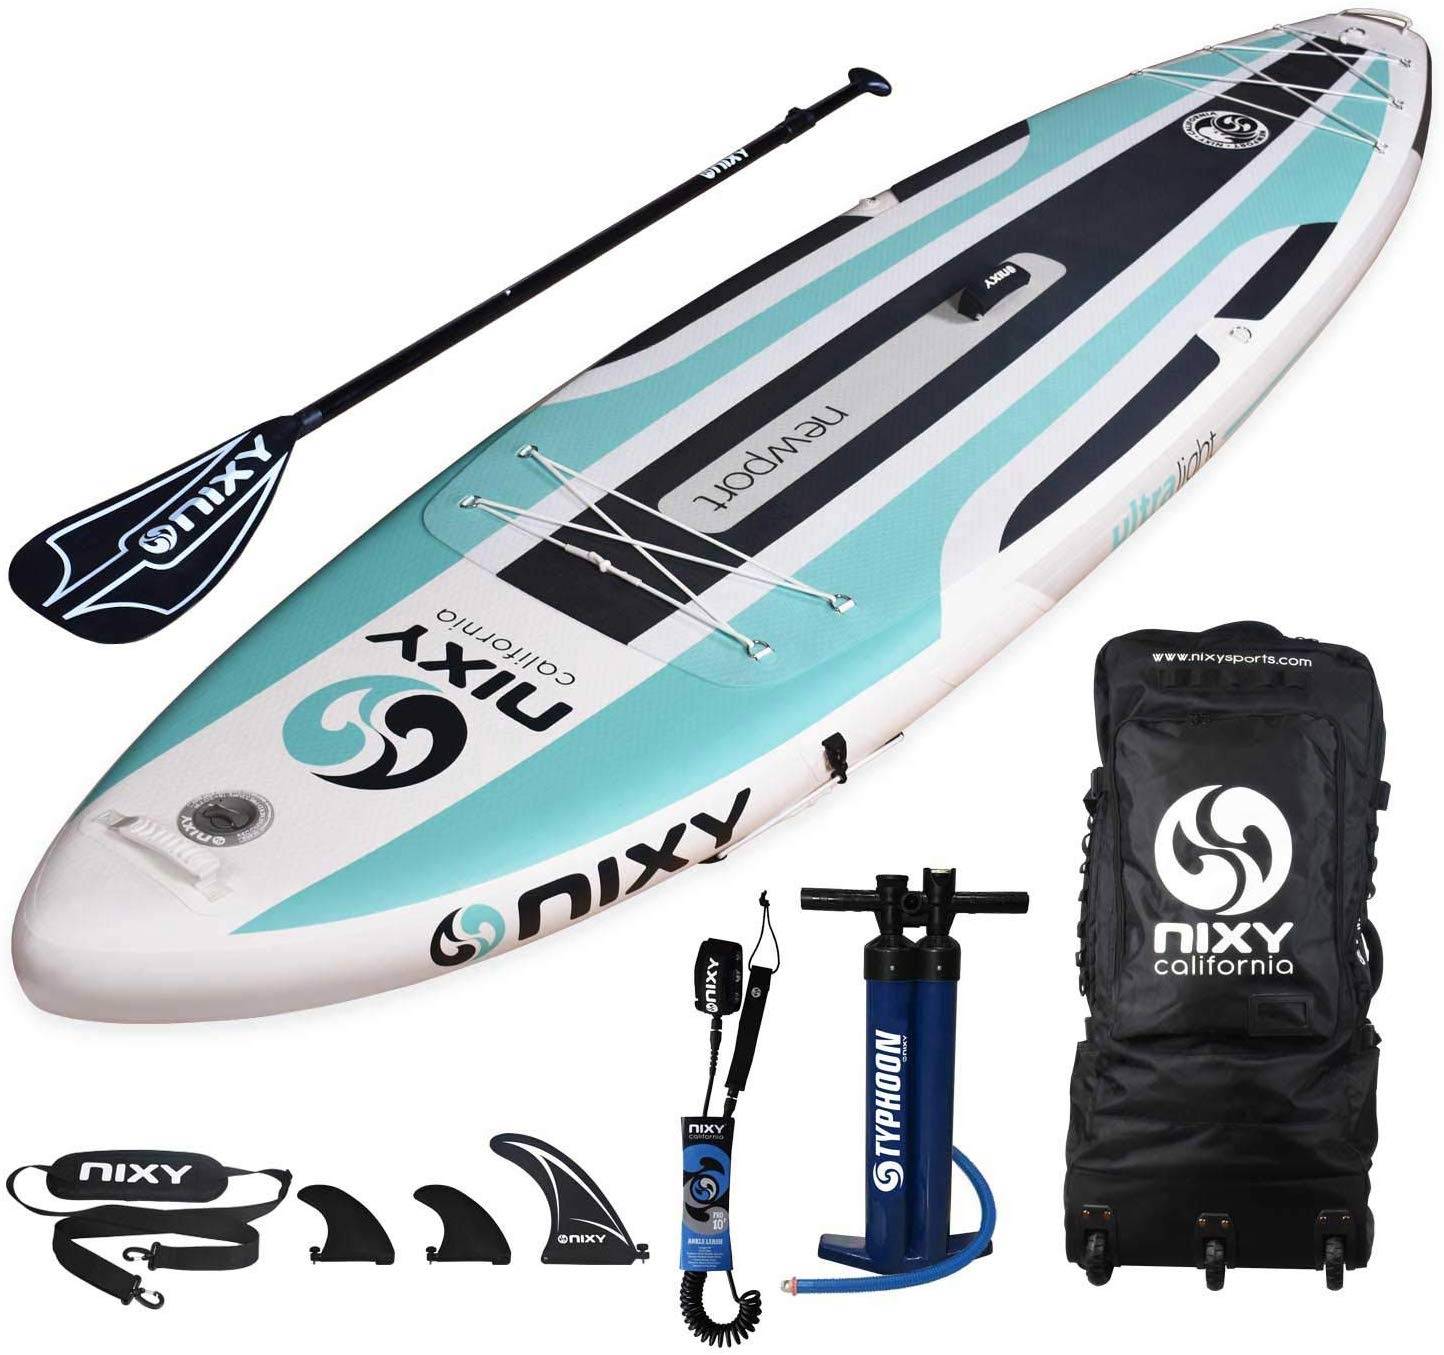 NIXY Newport Paddle Board - Stable and fast paddleboard